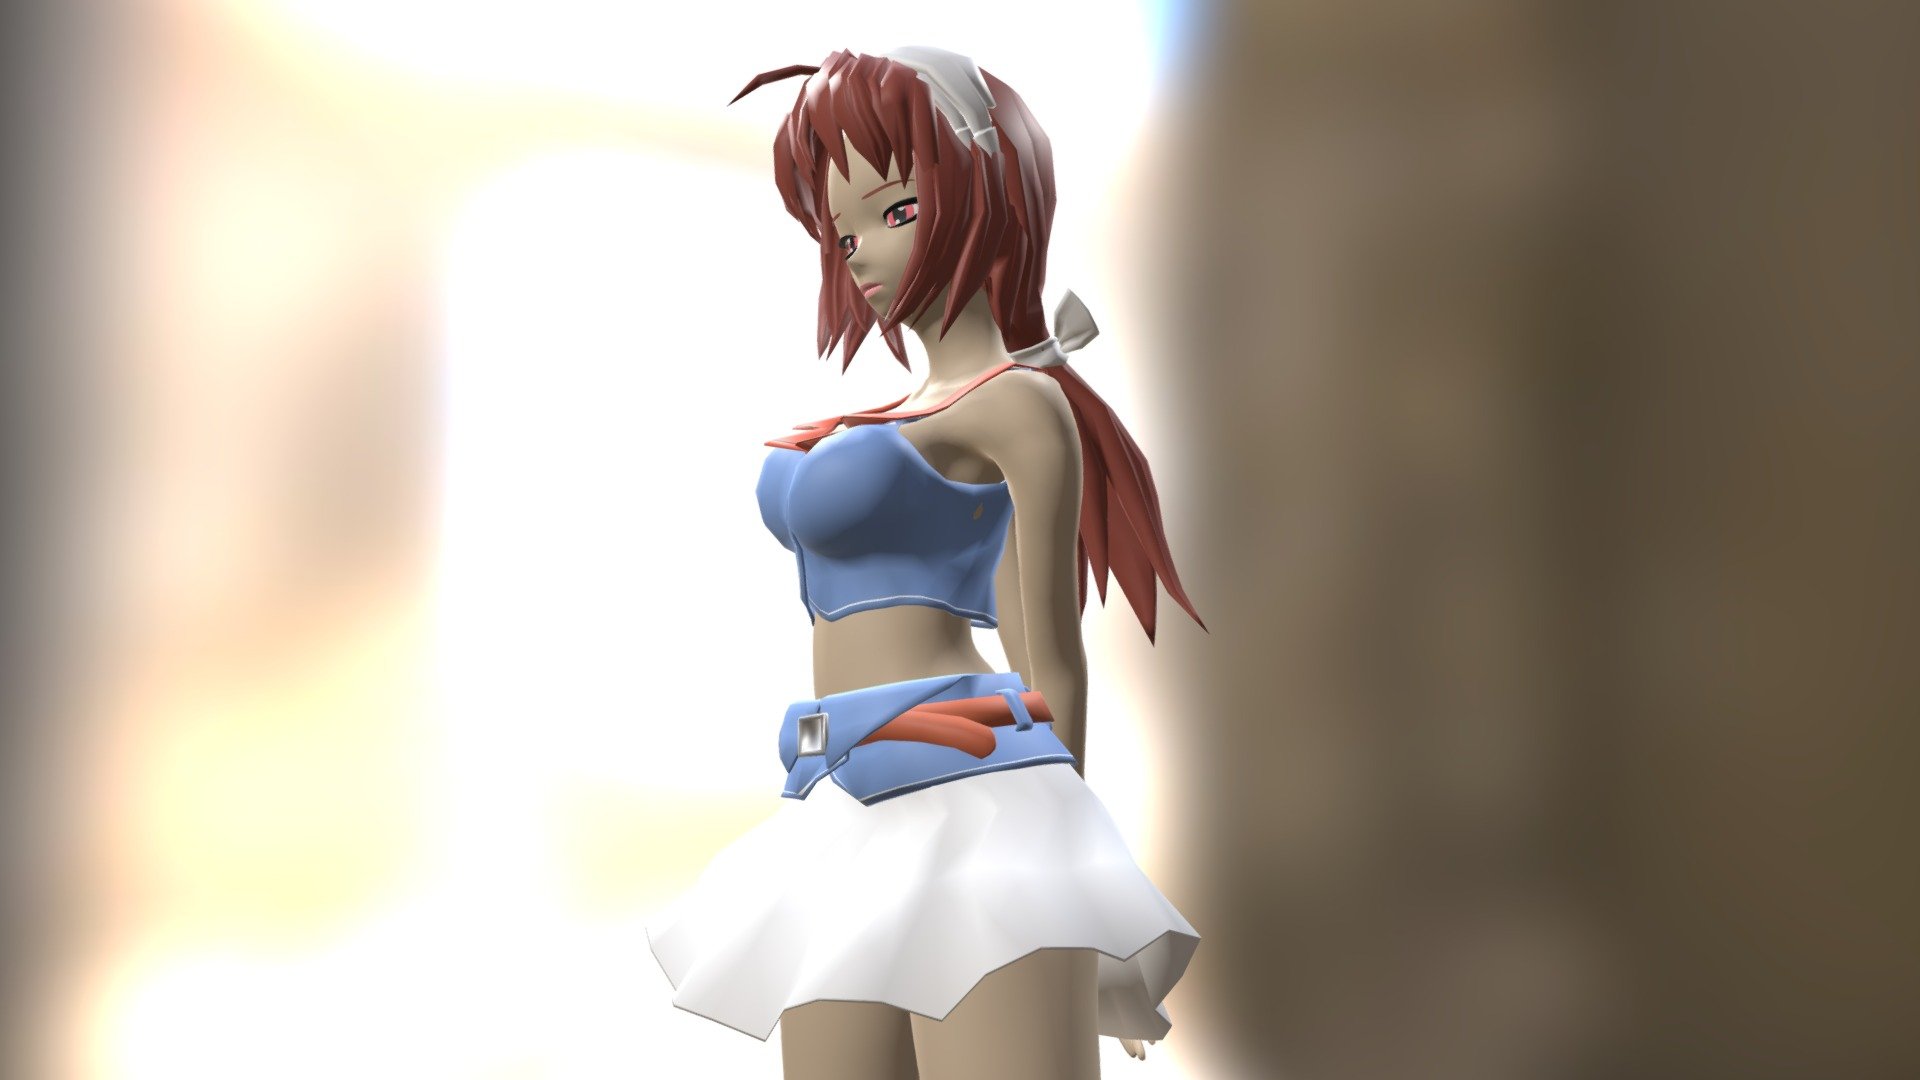 Anime Cowgirl 3d Model By Theouterlinux [0f7c0ca] Sketchfab